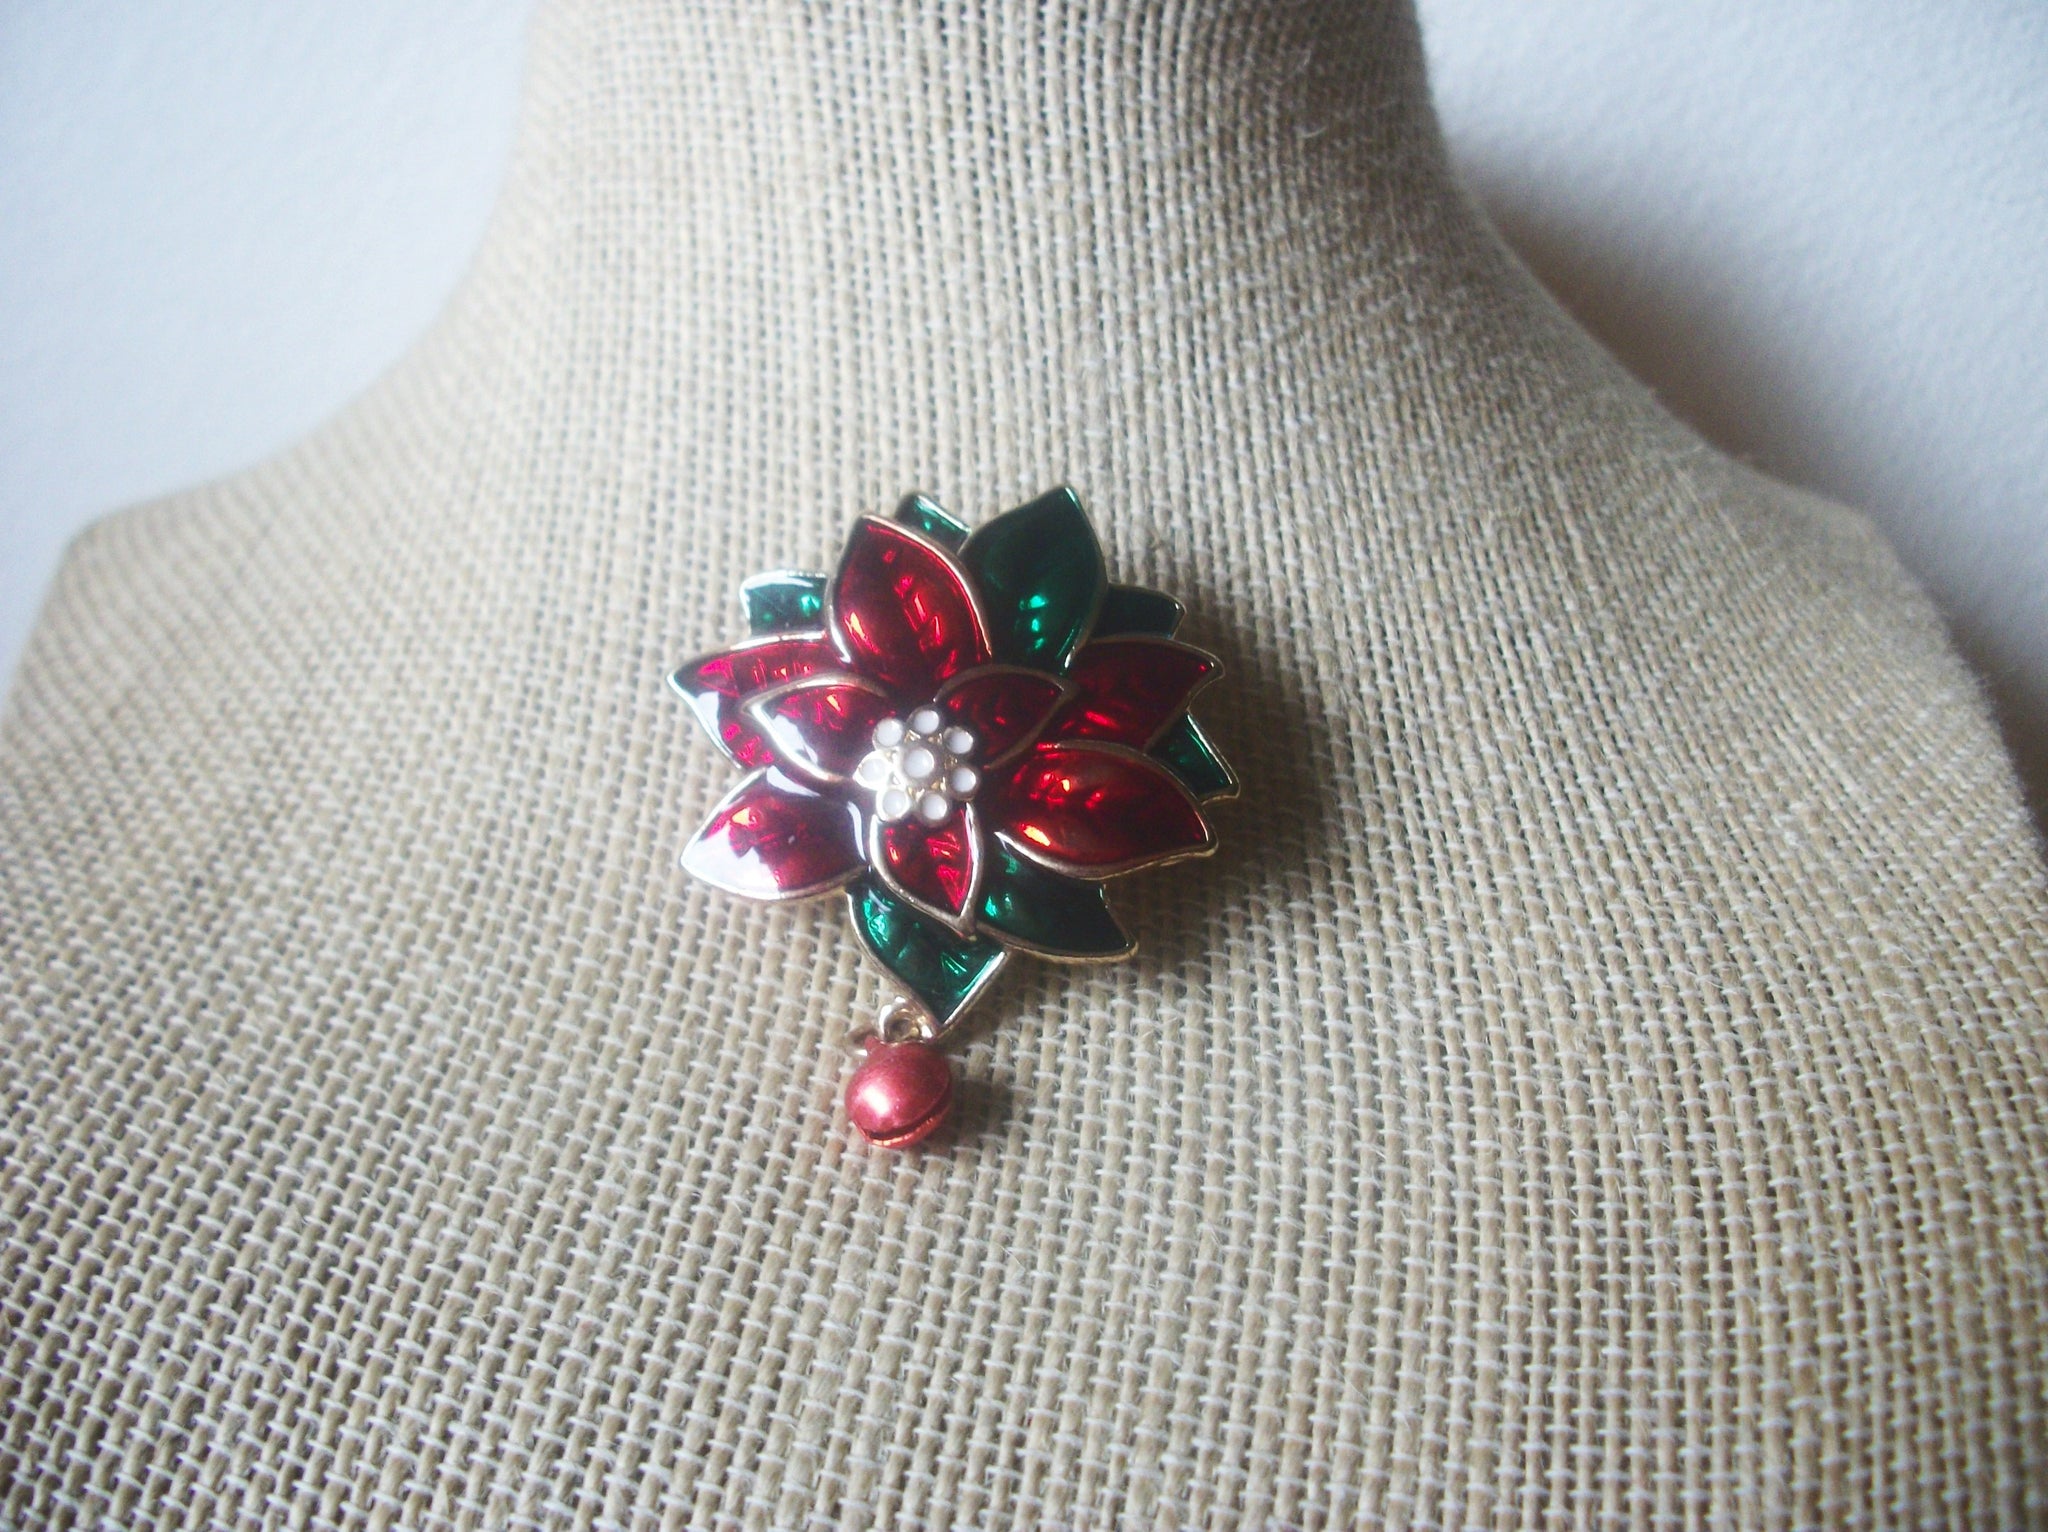 Gold Tone, Poinsettia Christmas, Enameled Red Green, Dangling Bell, Vintage Brooch Pin 022121